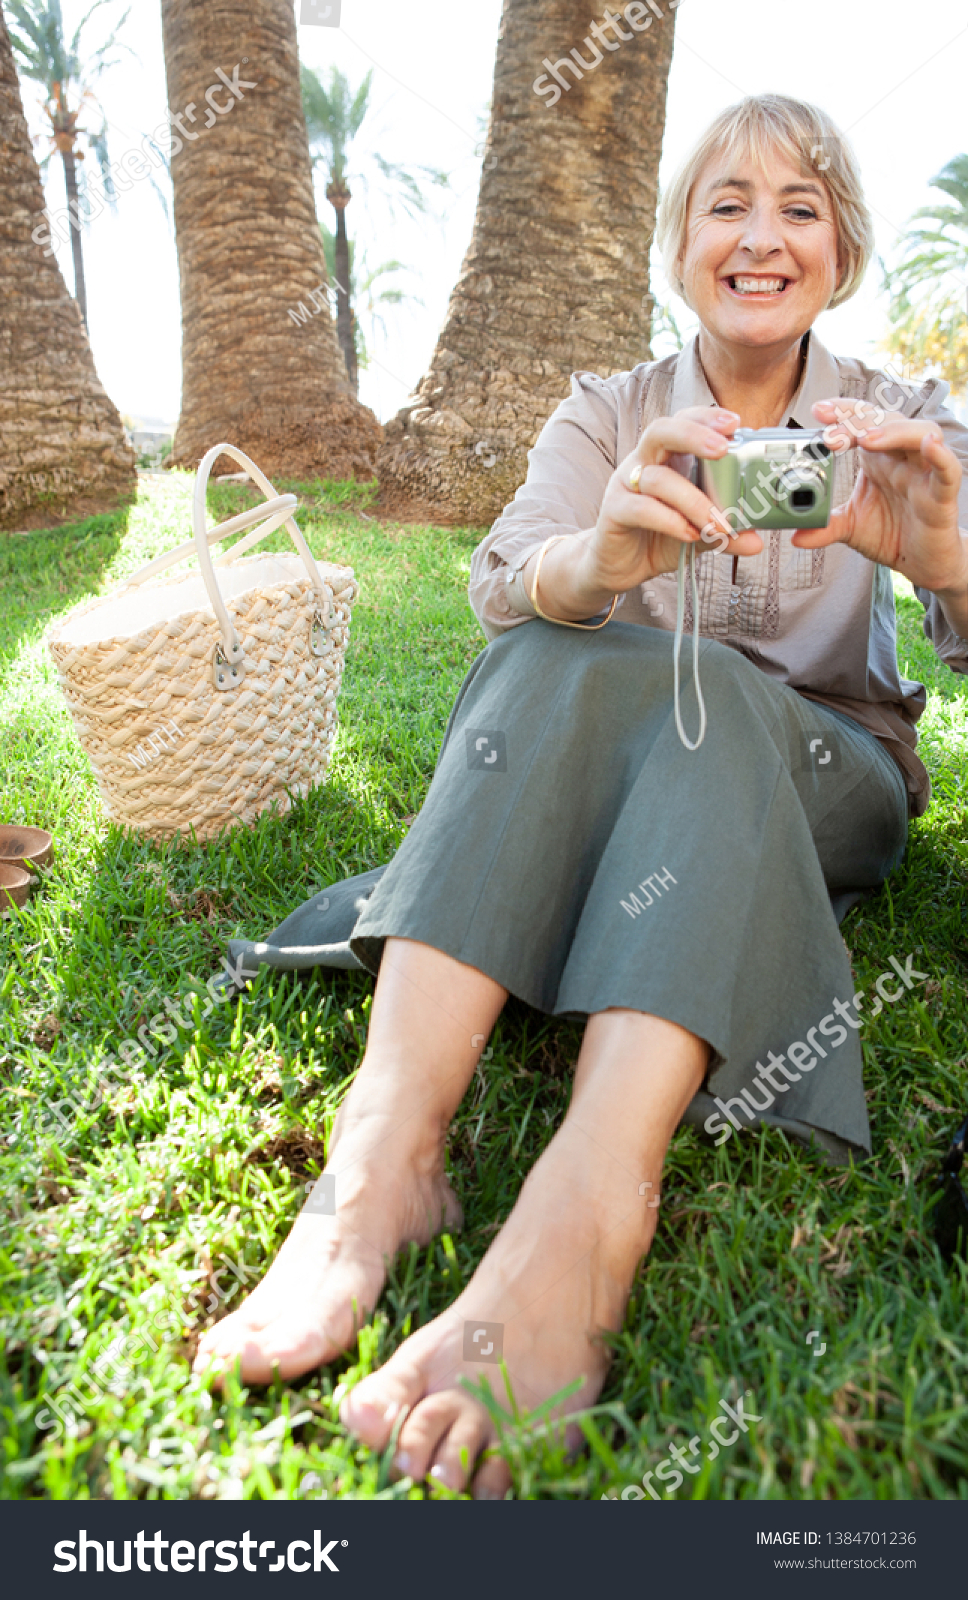 Beautiful mature woman sitting relaxing on grass park holding a digital photographic camera, smiling in sunny outdoors. Senior female tourist on holiday break, leisure technology lifestyle leisure. #1384701236